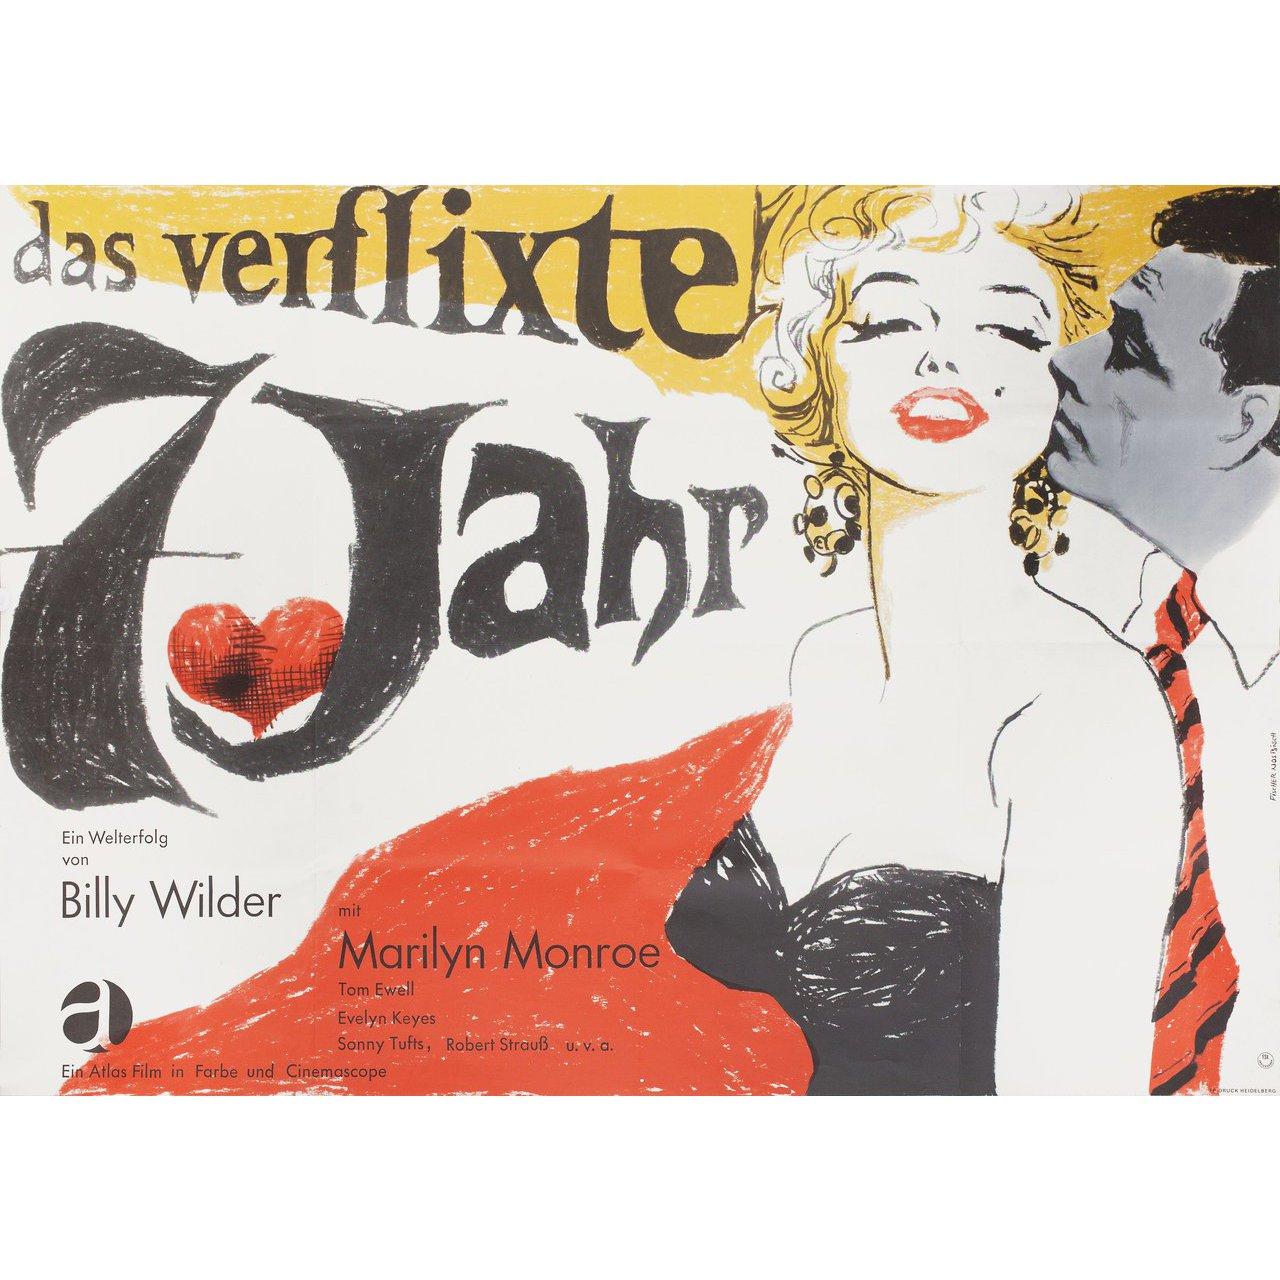 Original 1966 re-release German A0 poster by Dorothea Fischer-Nosbisch for the 1955 film The Seven Year Itch directed by Billy Wilder with Marilyn Monroe / Tom Ewell / Evelyn Keyes / Sonny Tufts. Very Good-Fine condition, folded. Many original